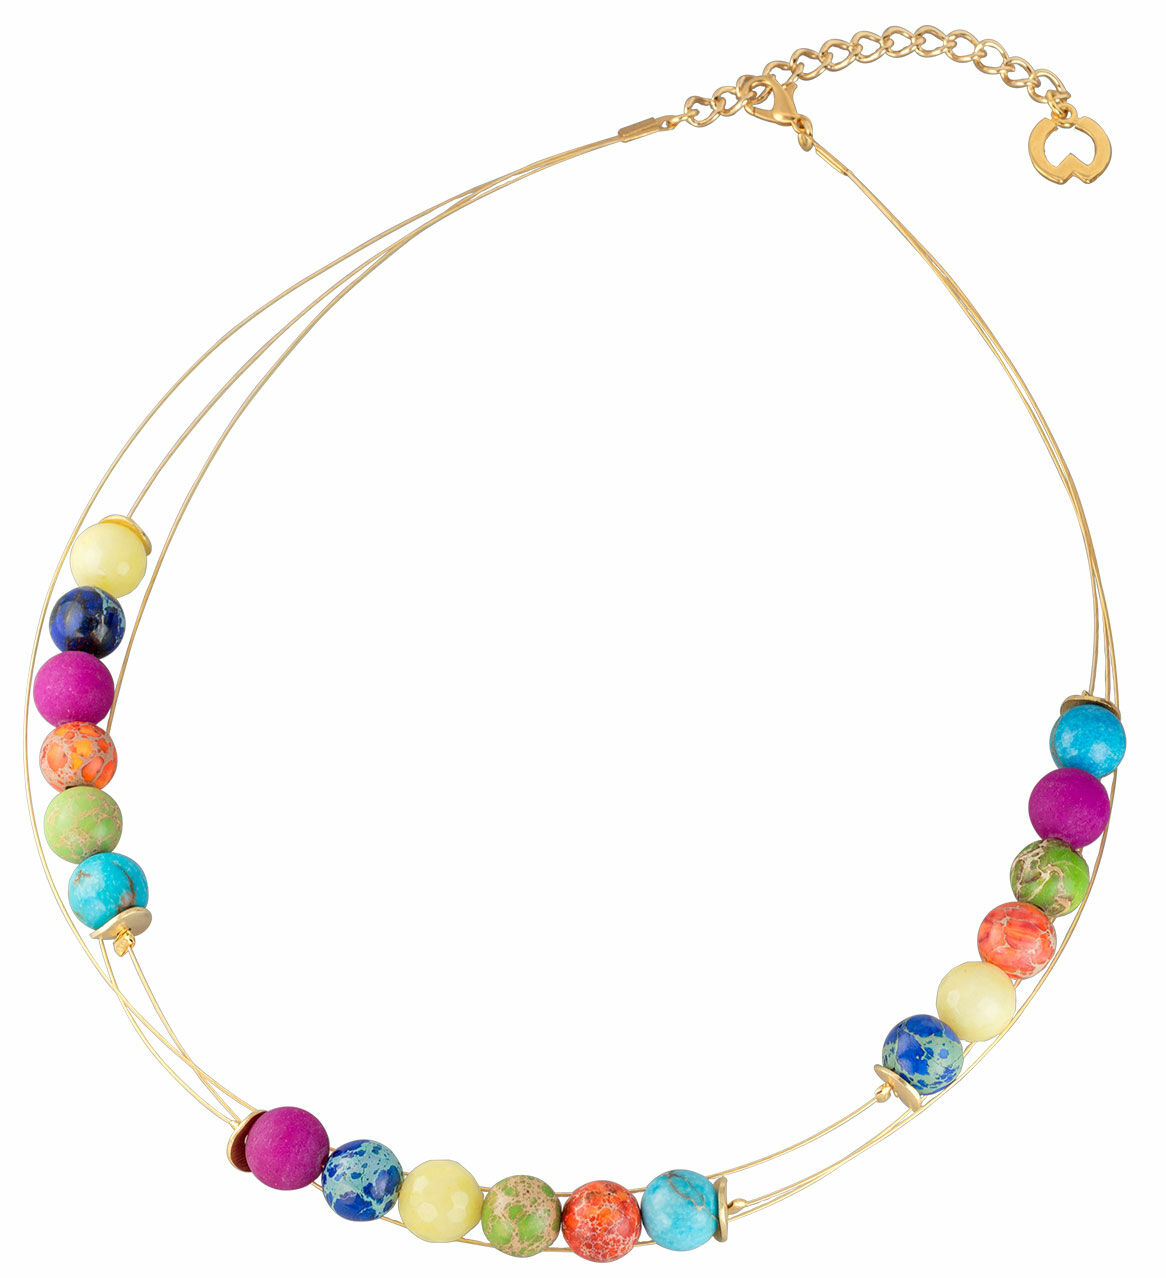 Necklace "Summer" with pearls by Petra Waszak